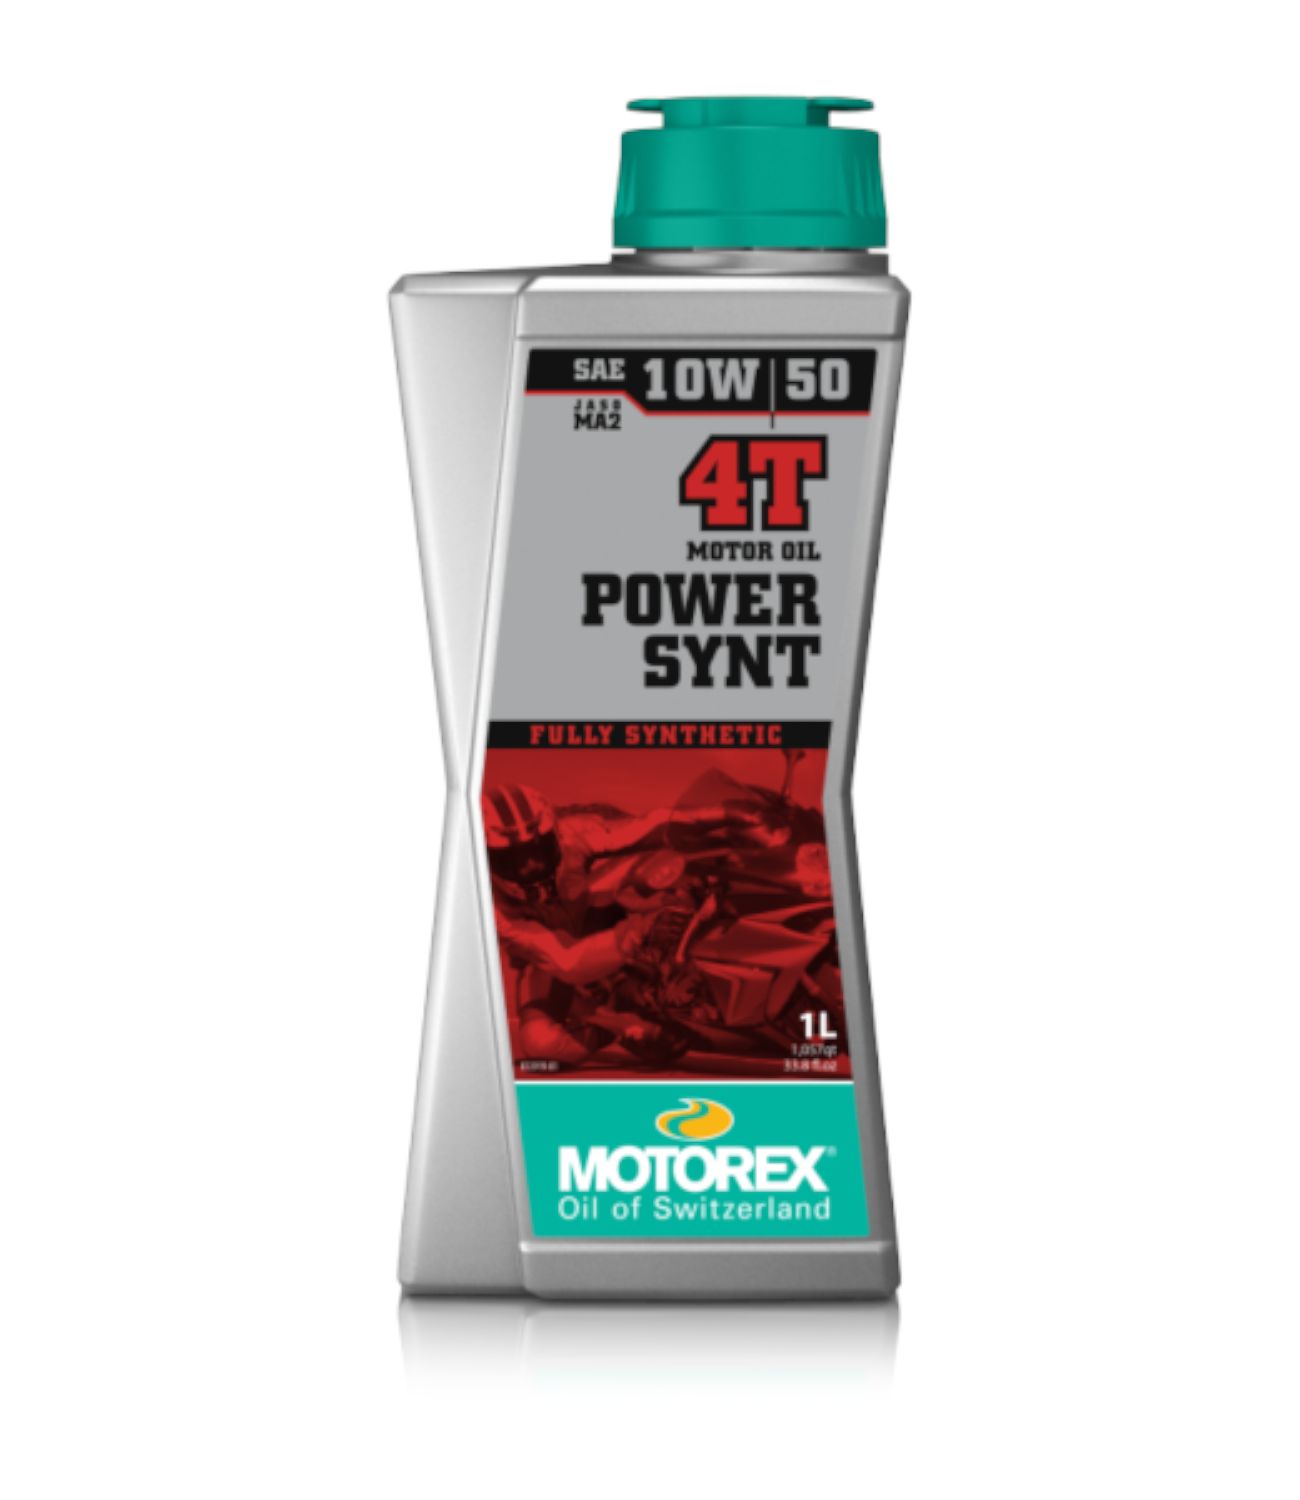 Motorex 10W50 Power Synth - Fully Synthetic Engine Oil (1 L)